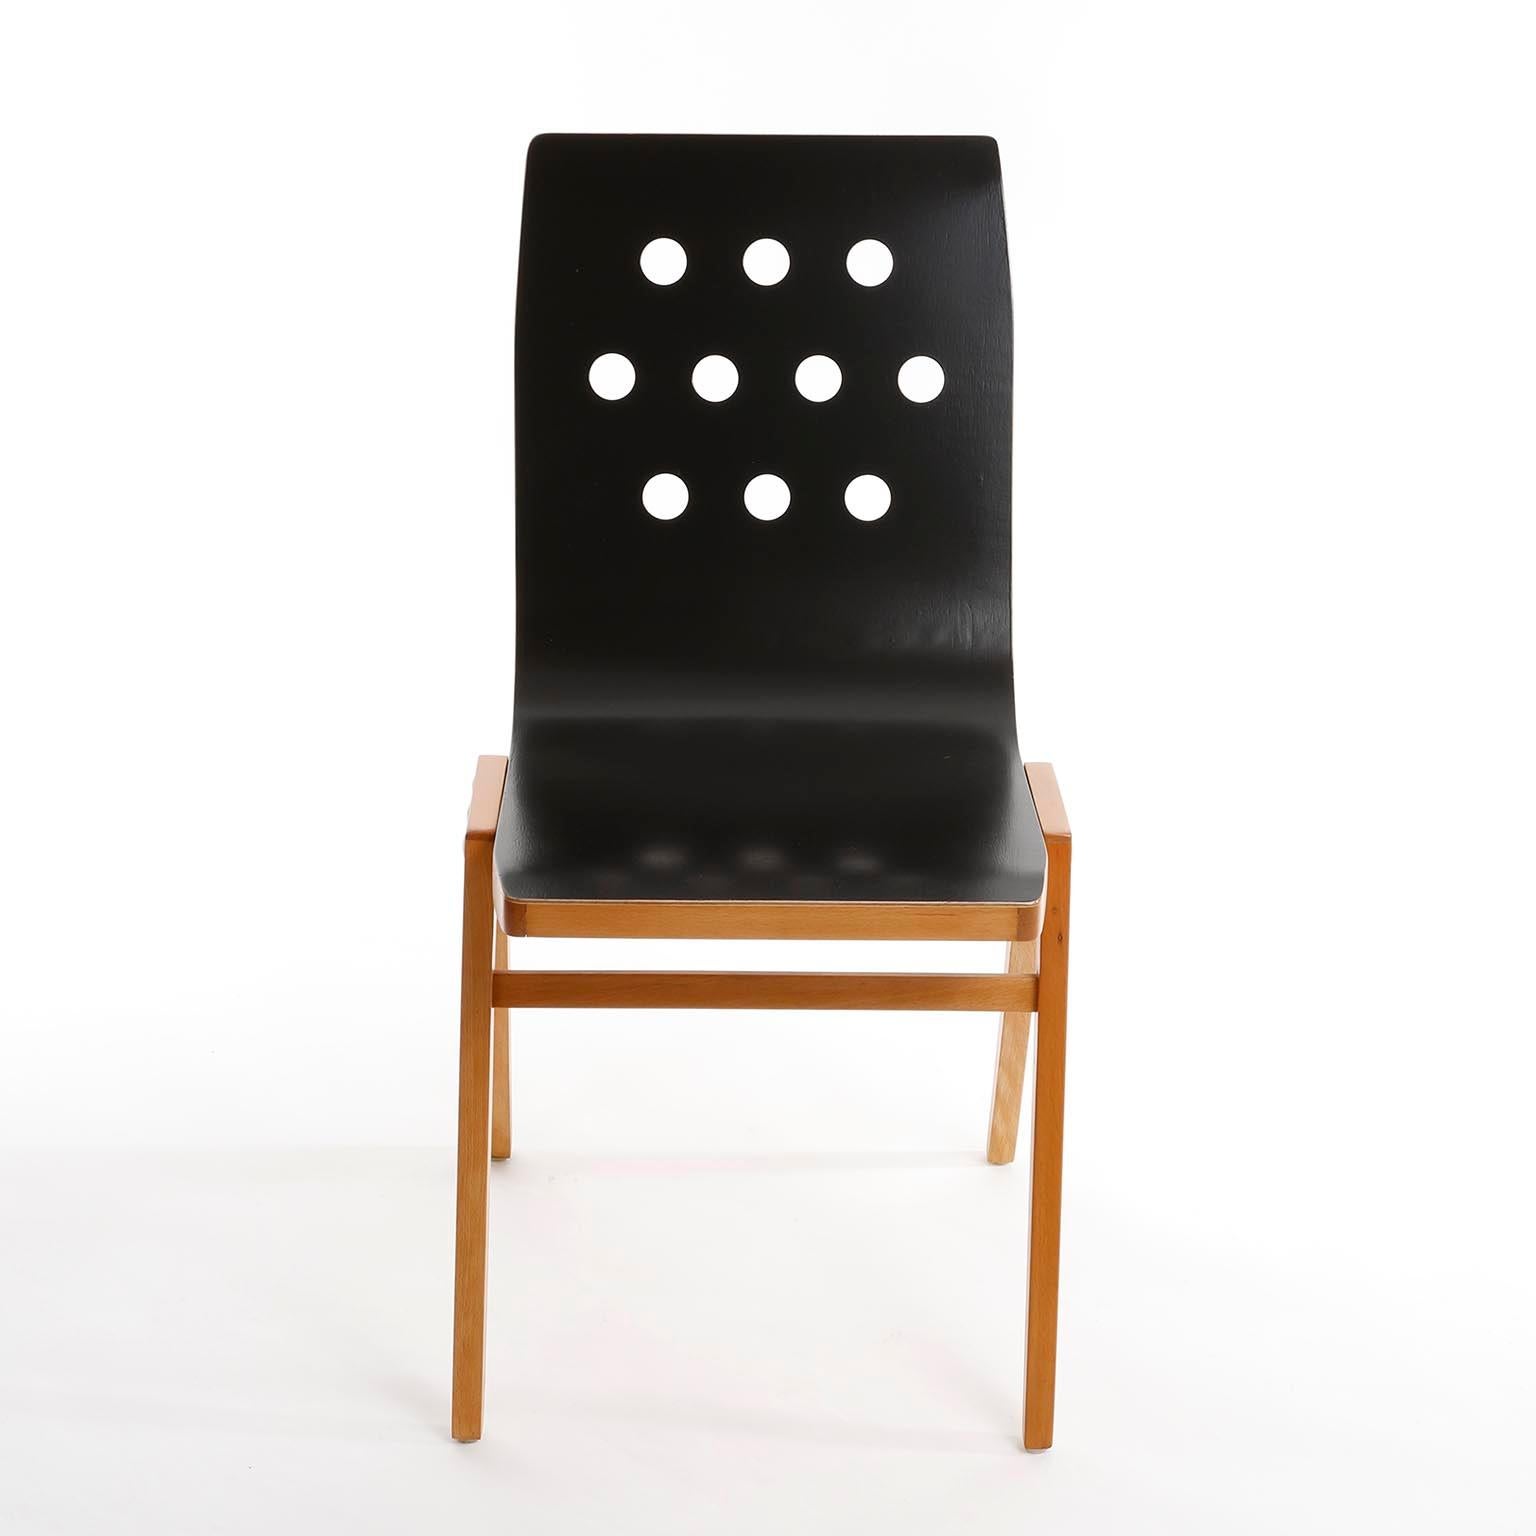 Mid-20th Century Set of Six Stacking Chairs by Roland Rainer, Black Beech Wood, Vienna, 1950s